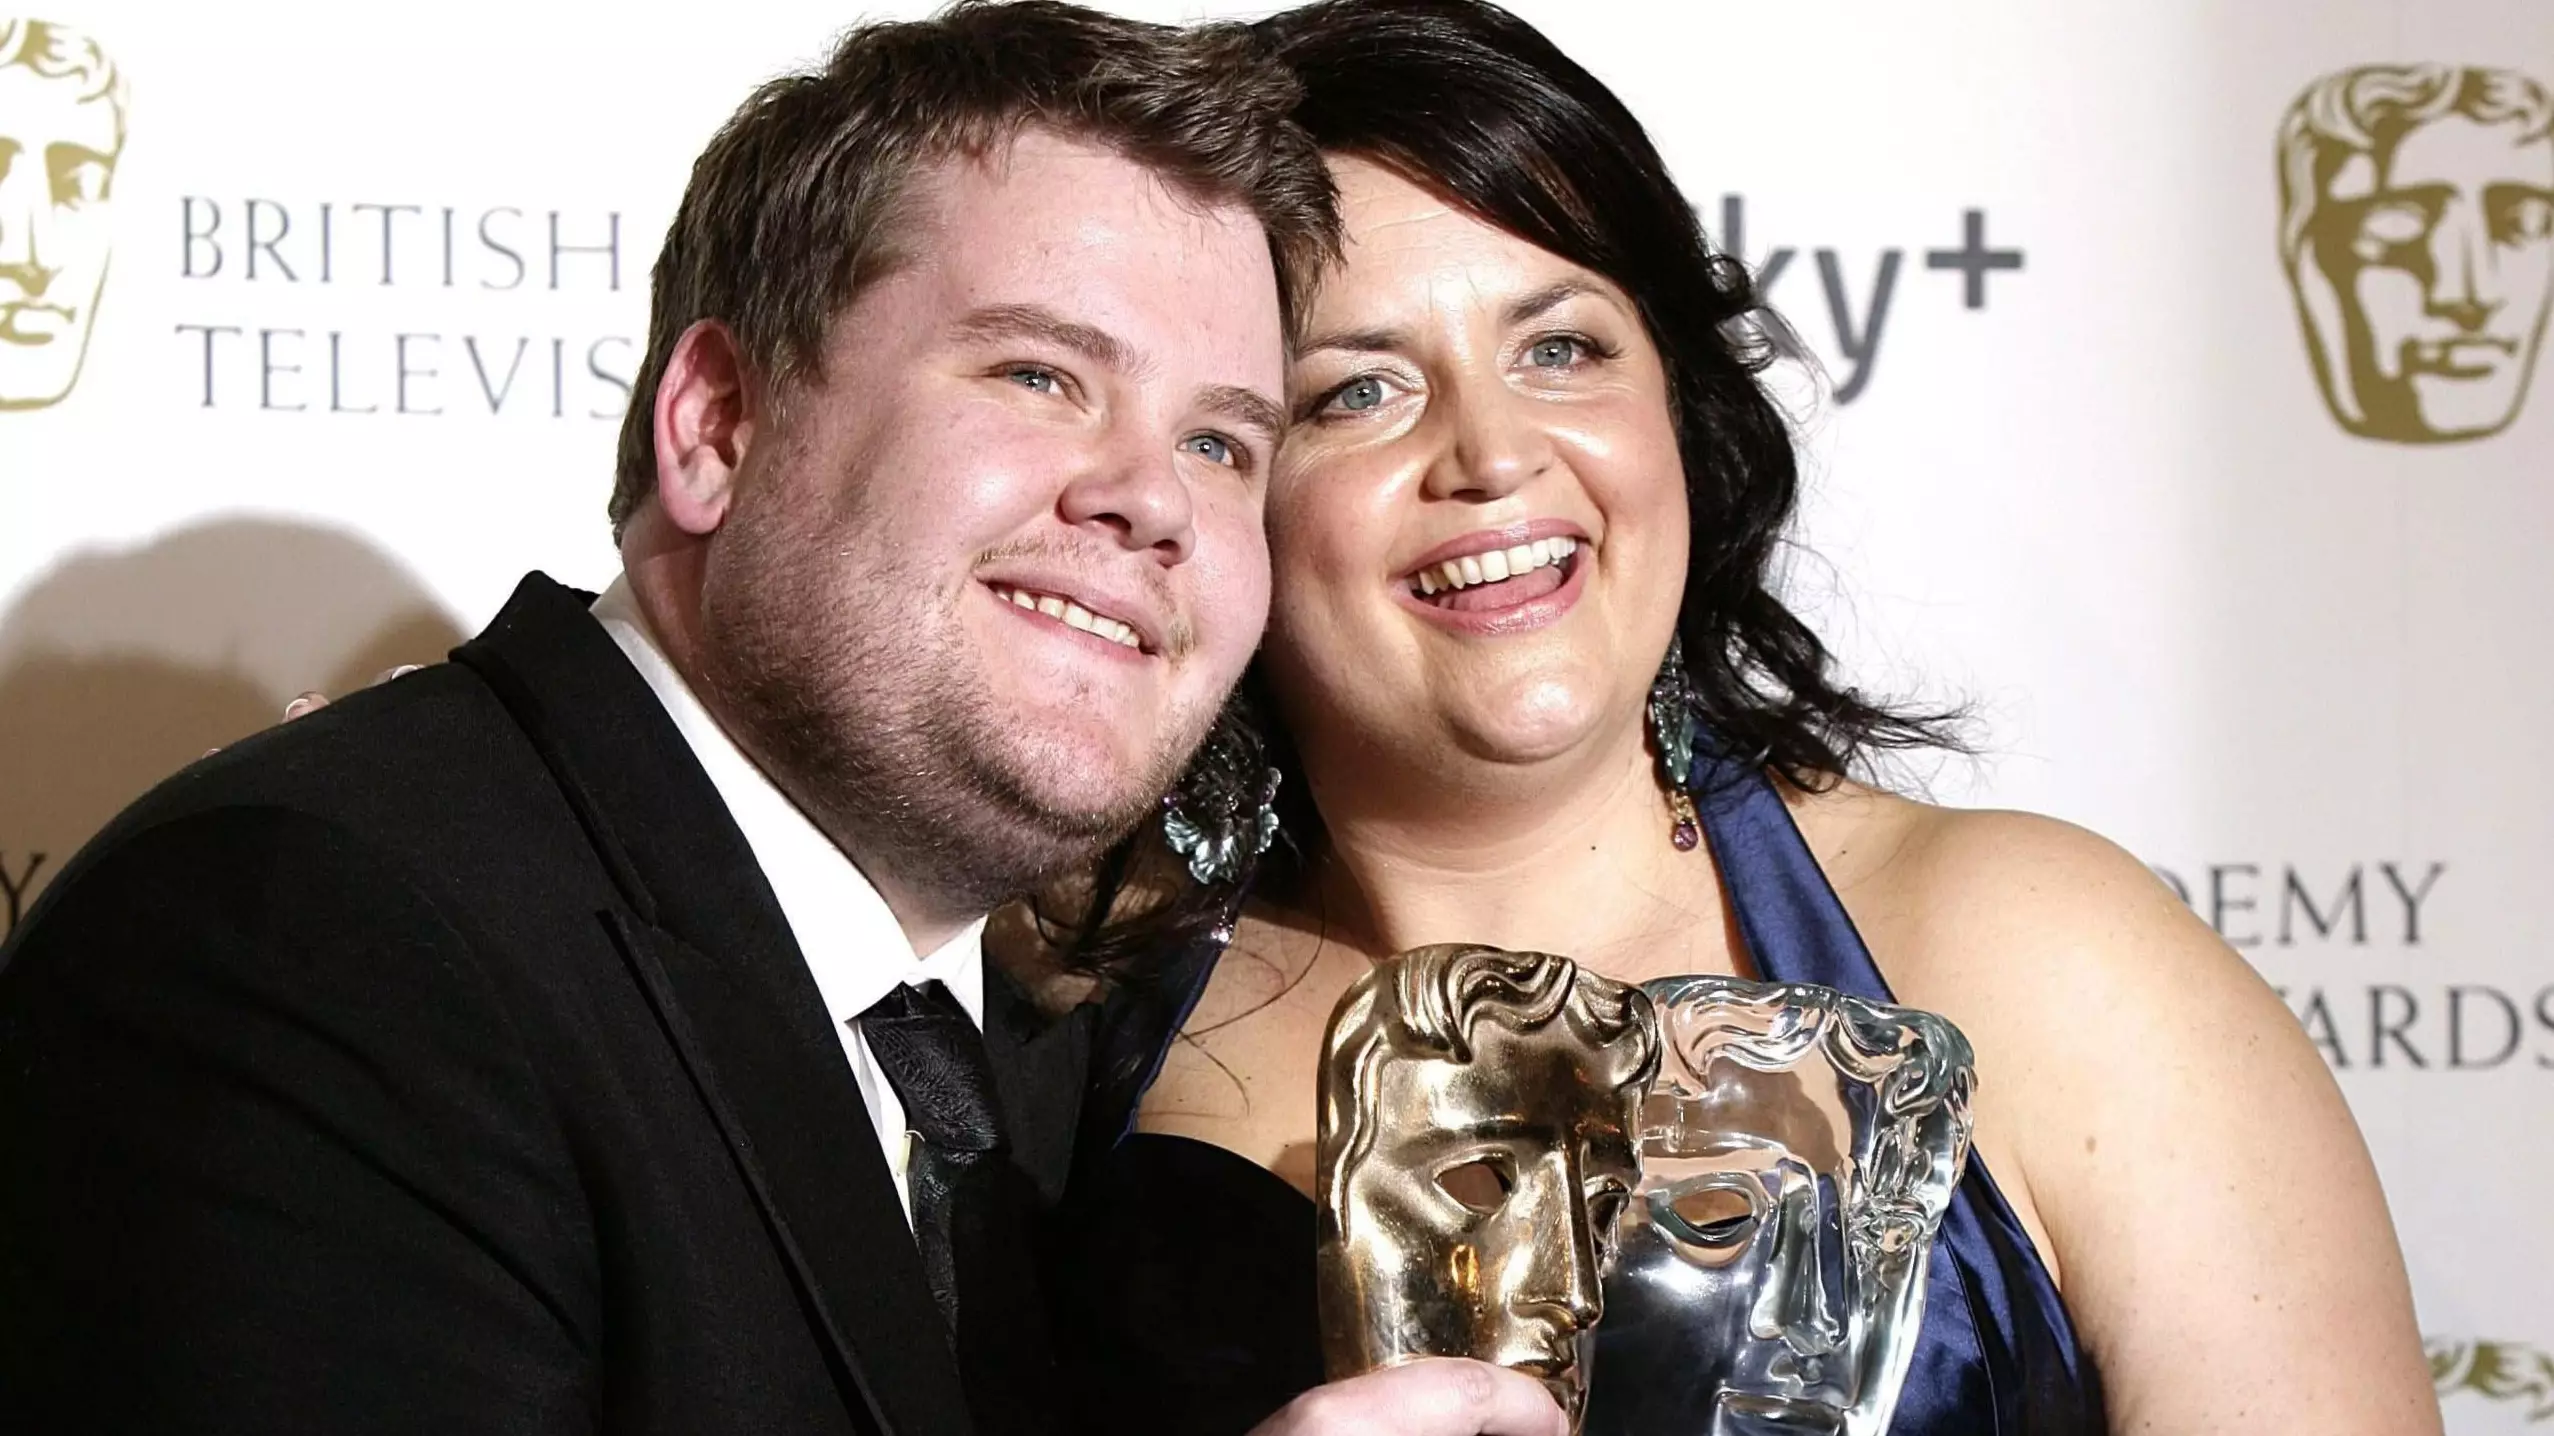 Gavin & Stacey's Ruth Jones Says There Is 'Room For More' Episodes